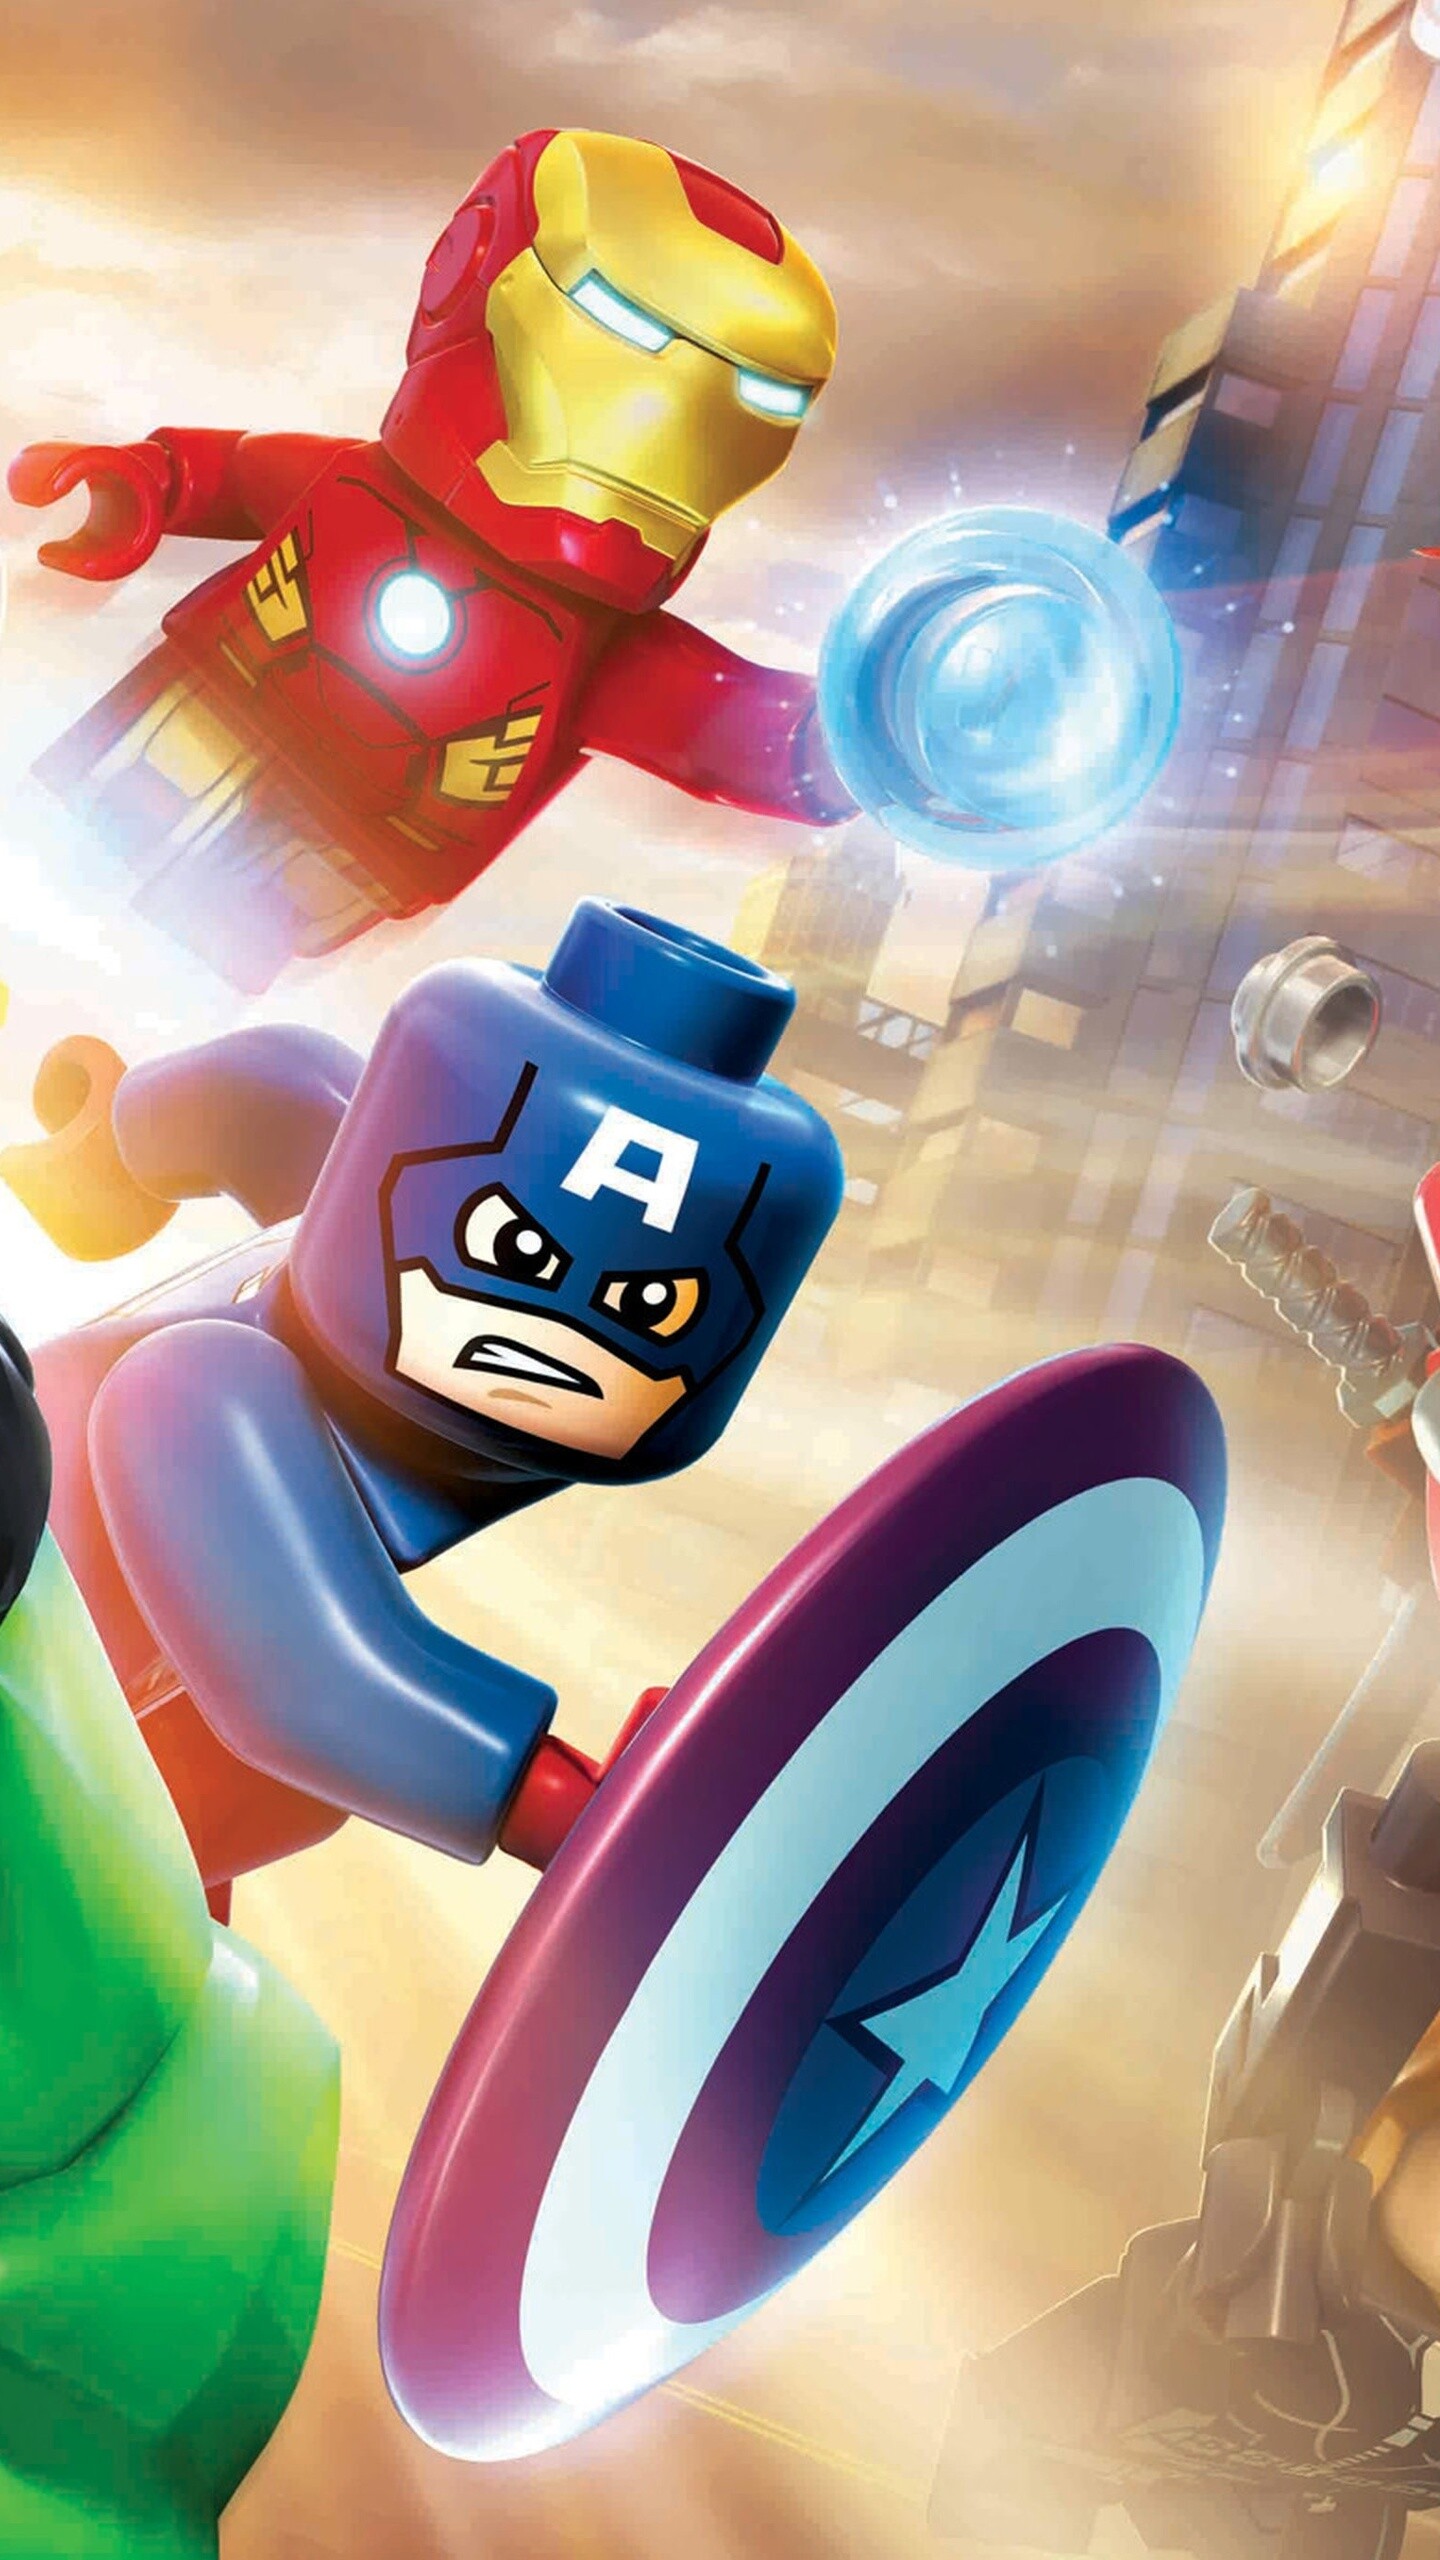 Lego: Marvel superheroes, Used to construct a variety of different objects. 1440x2560 HD Background.